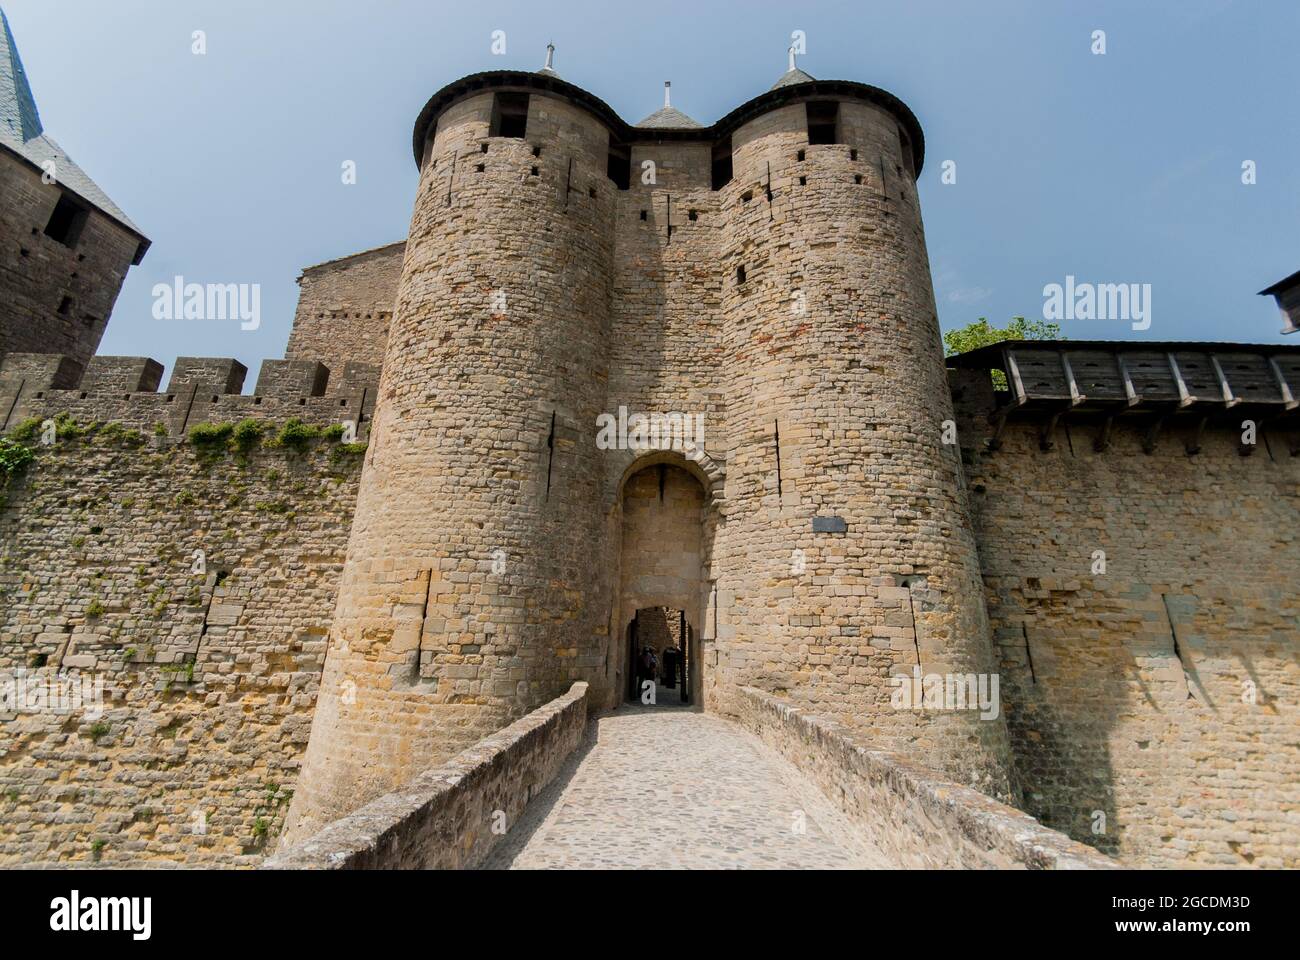 Das Tor zur inneren Burg von Carcassonne - the gate to the inner castle of the fortified city of Carcassonne with its double towers Stock Photo